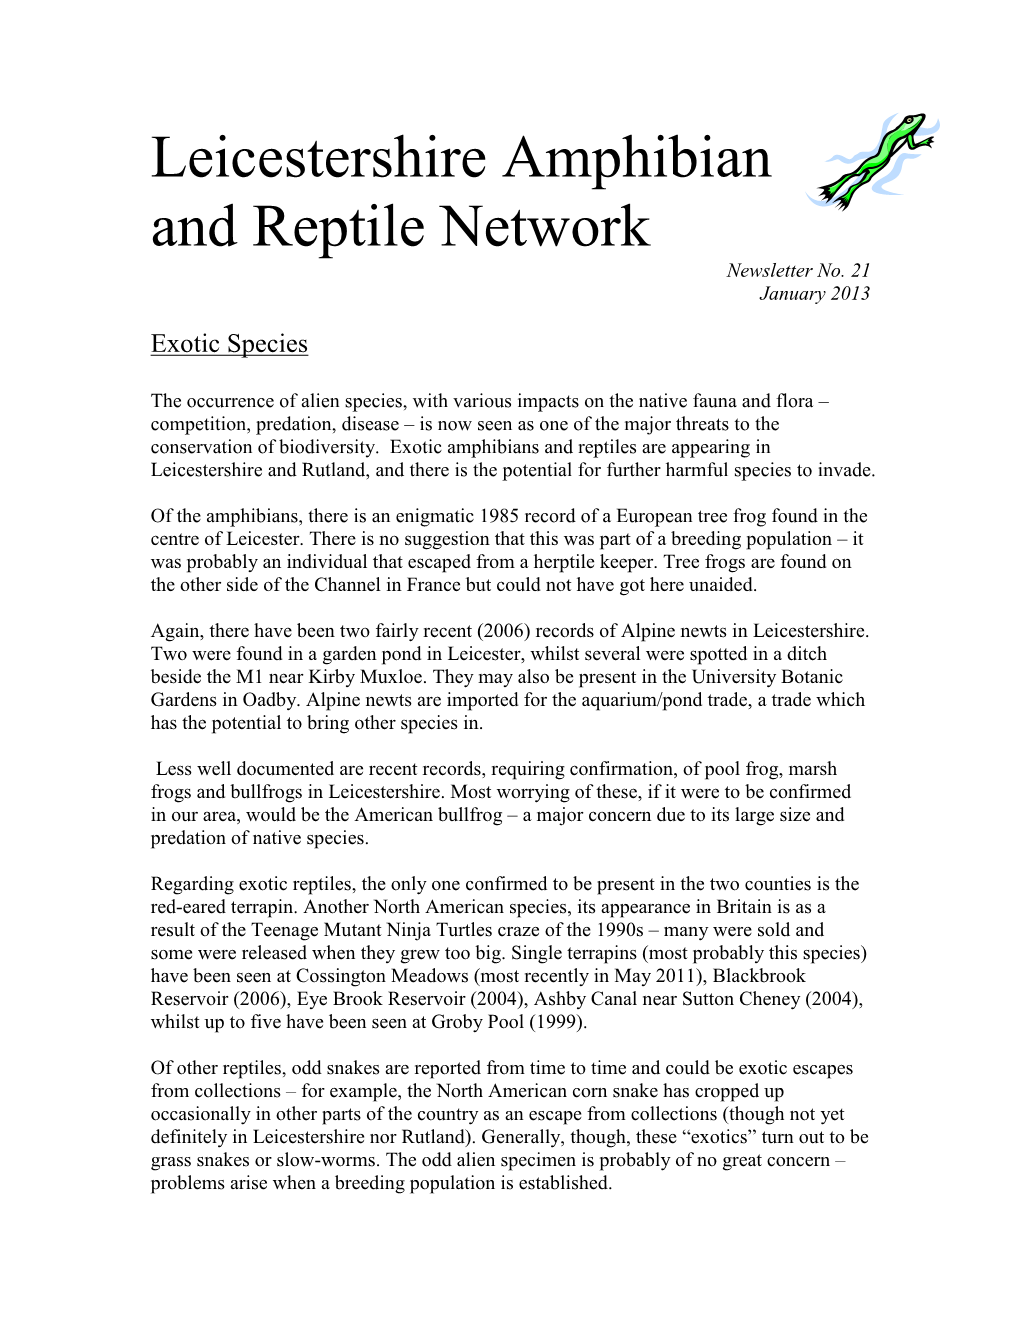 LARN Newsletter Will Feature a Review of Amphibians and Reptiles on Leicestershire and Rutland Wildlife Trust Nature Reserves